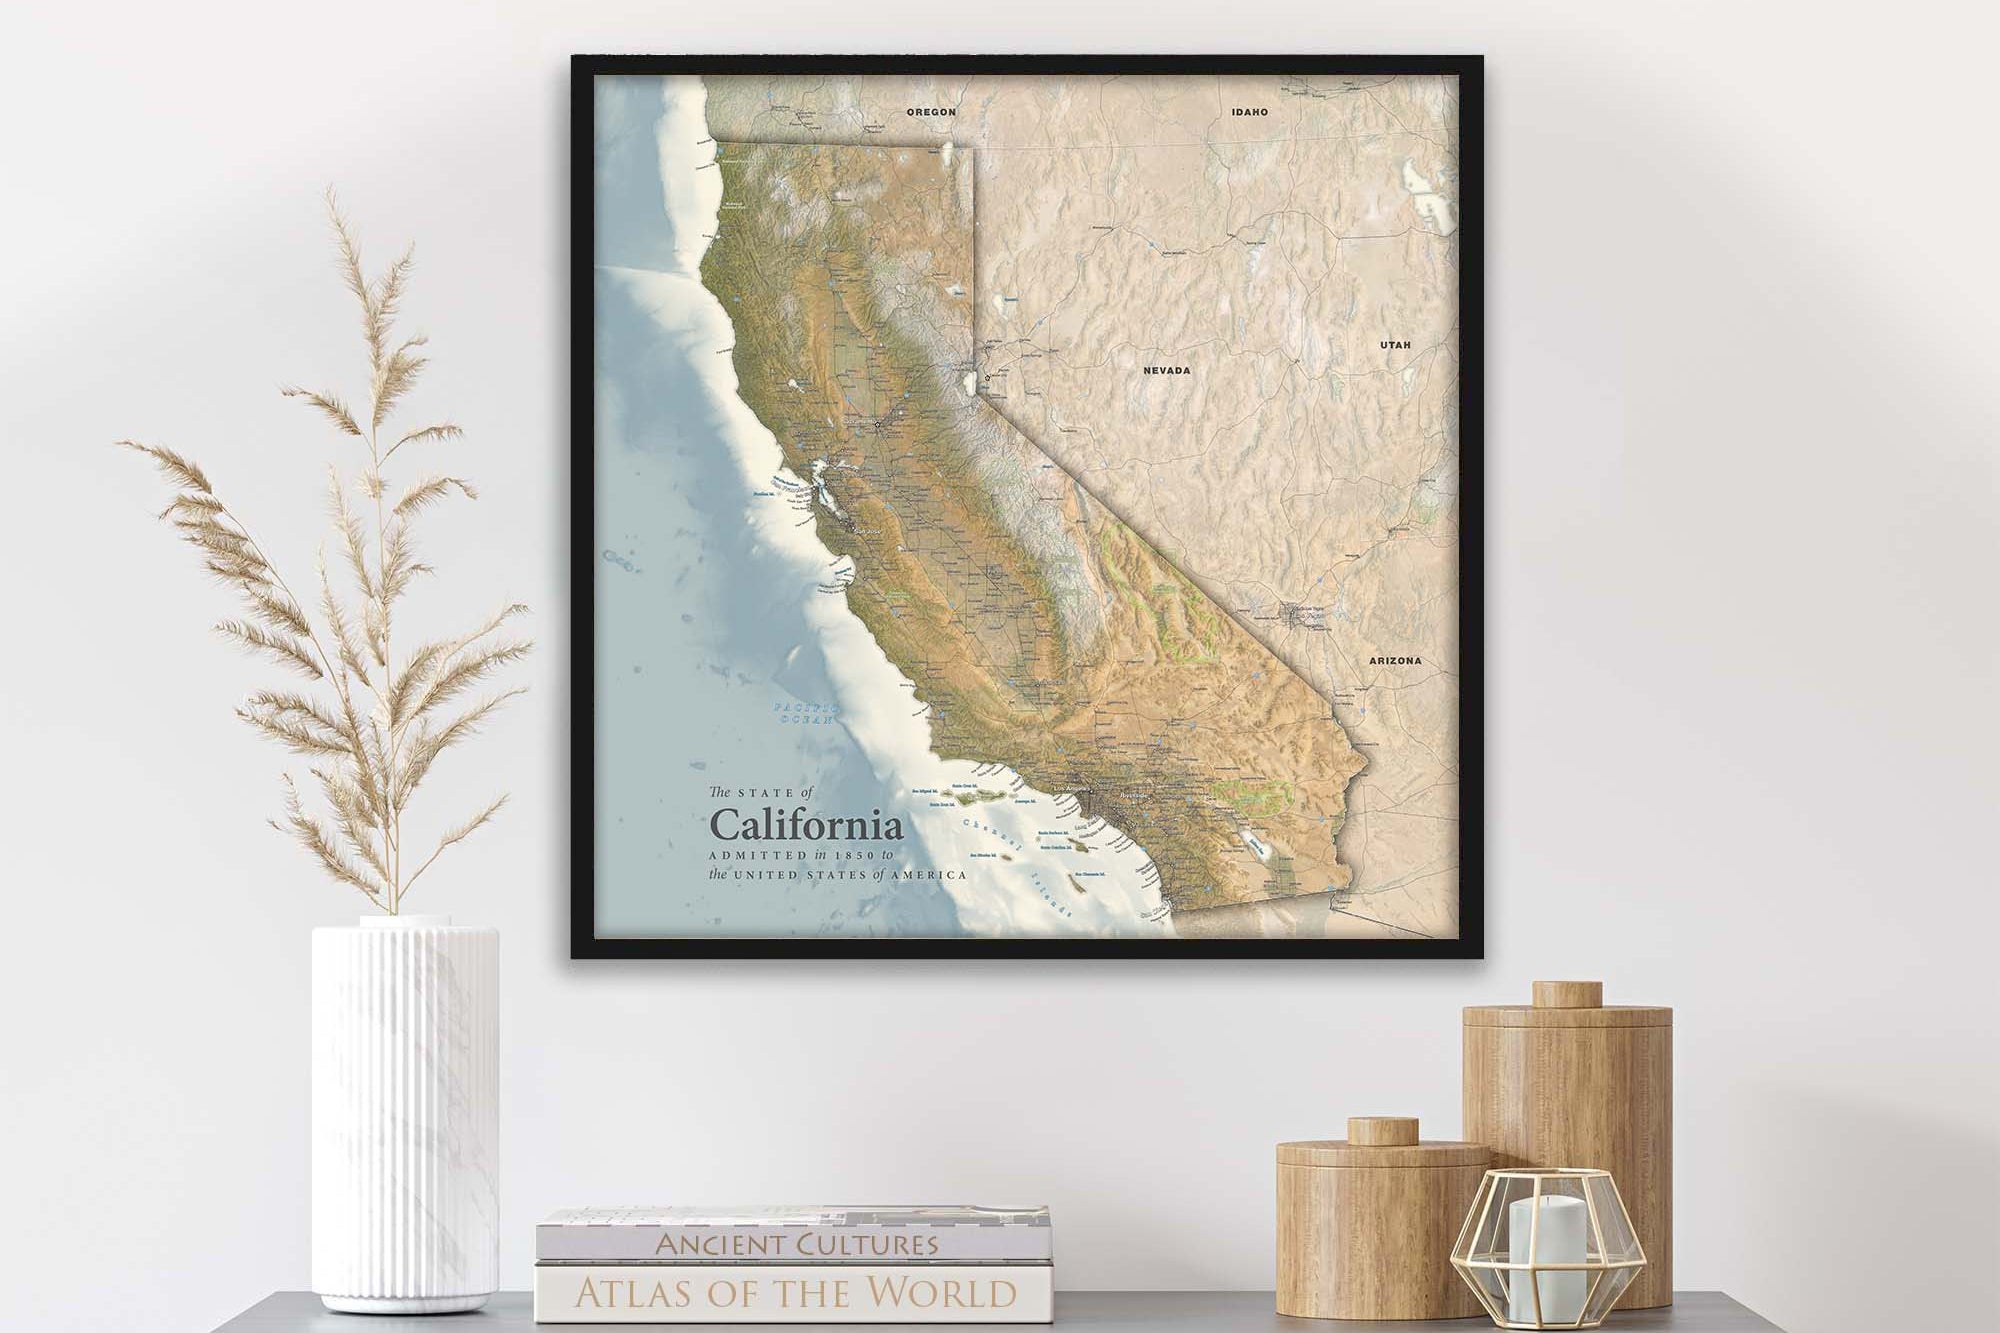 Travel map of California in a black frame on a wall above a shelf